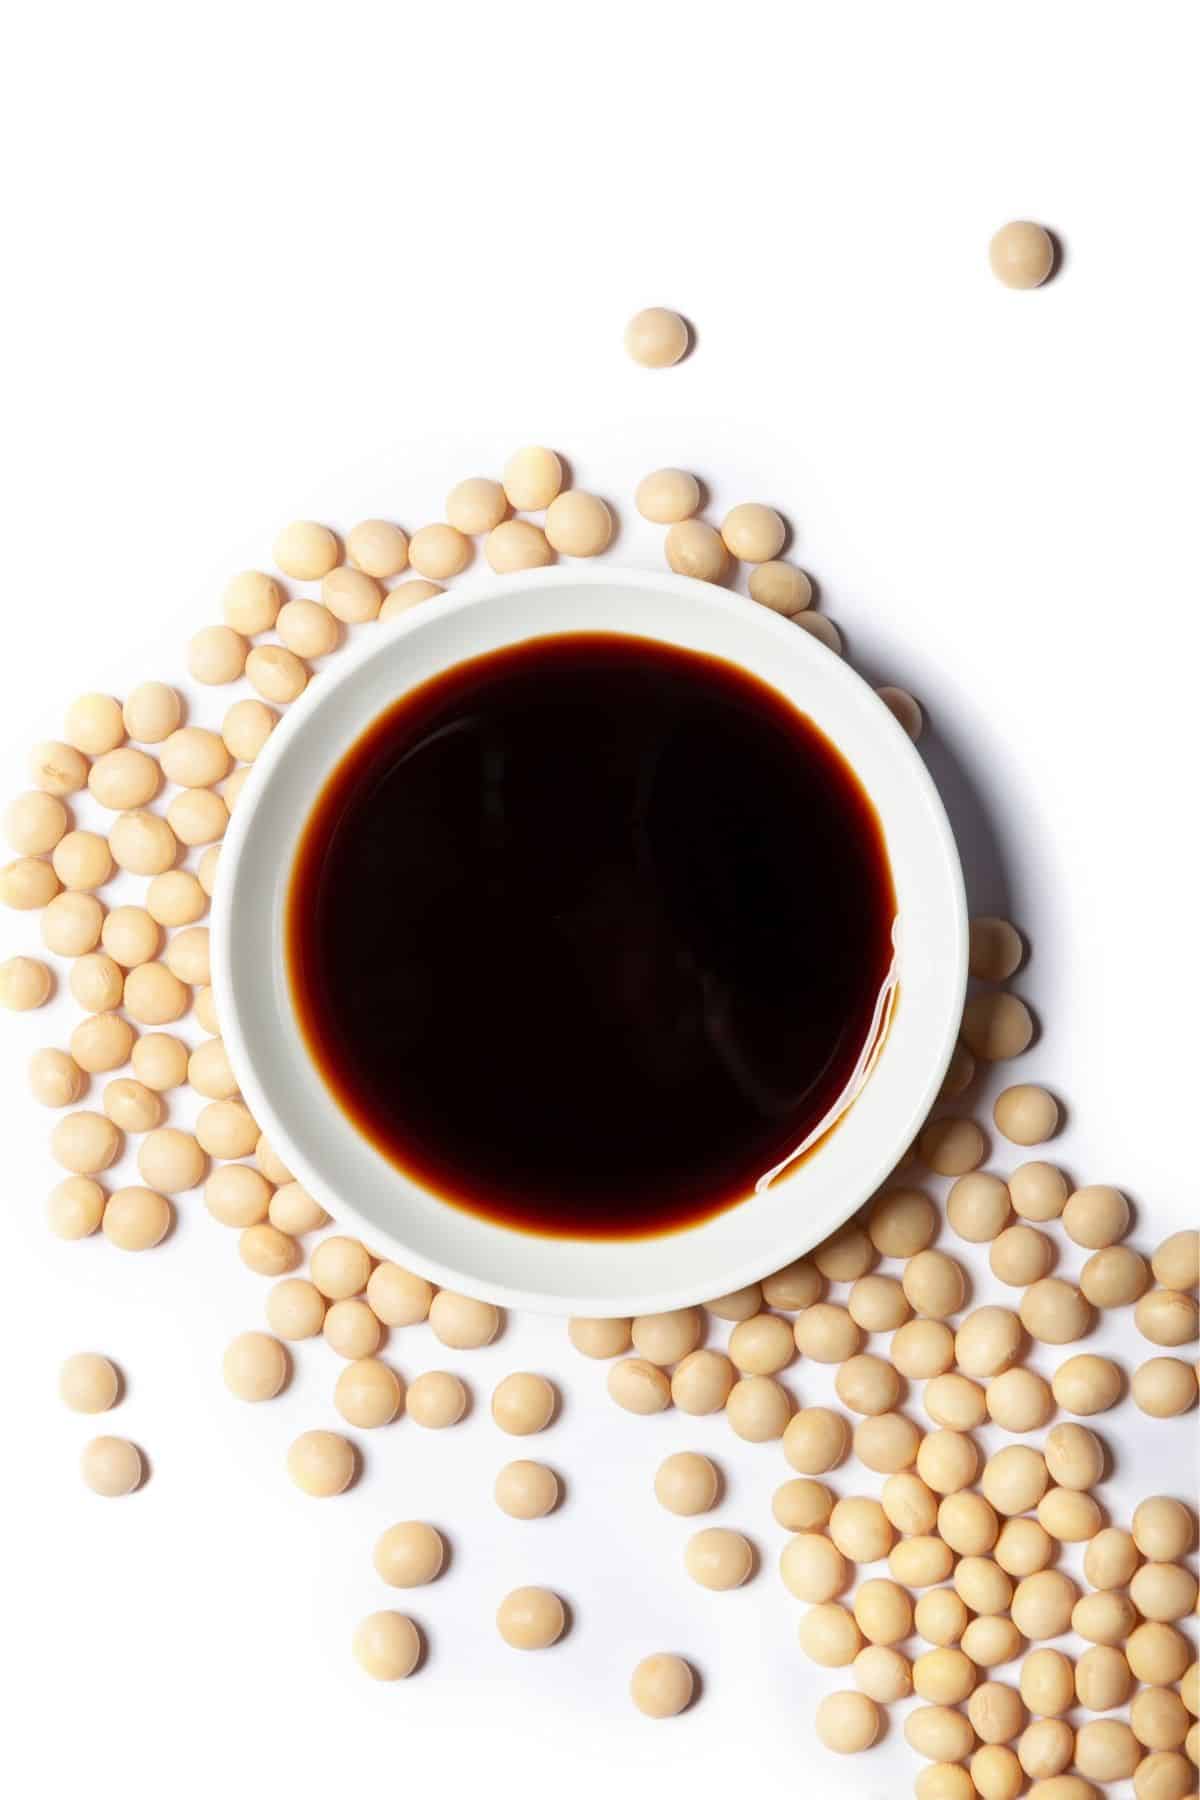 soy sauce in a white bowl.